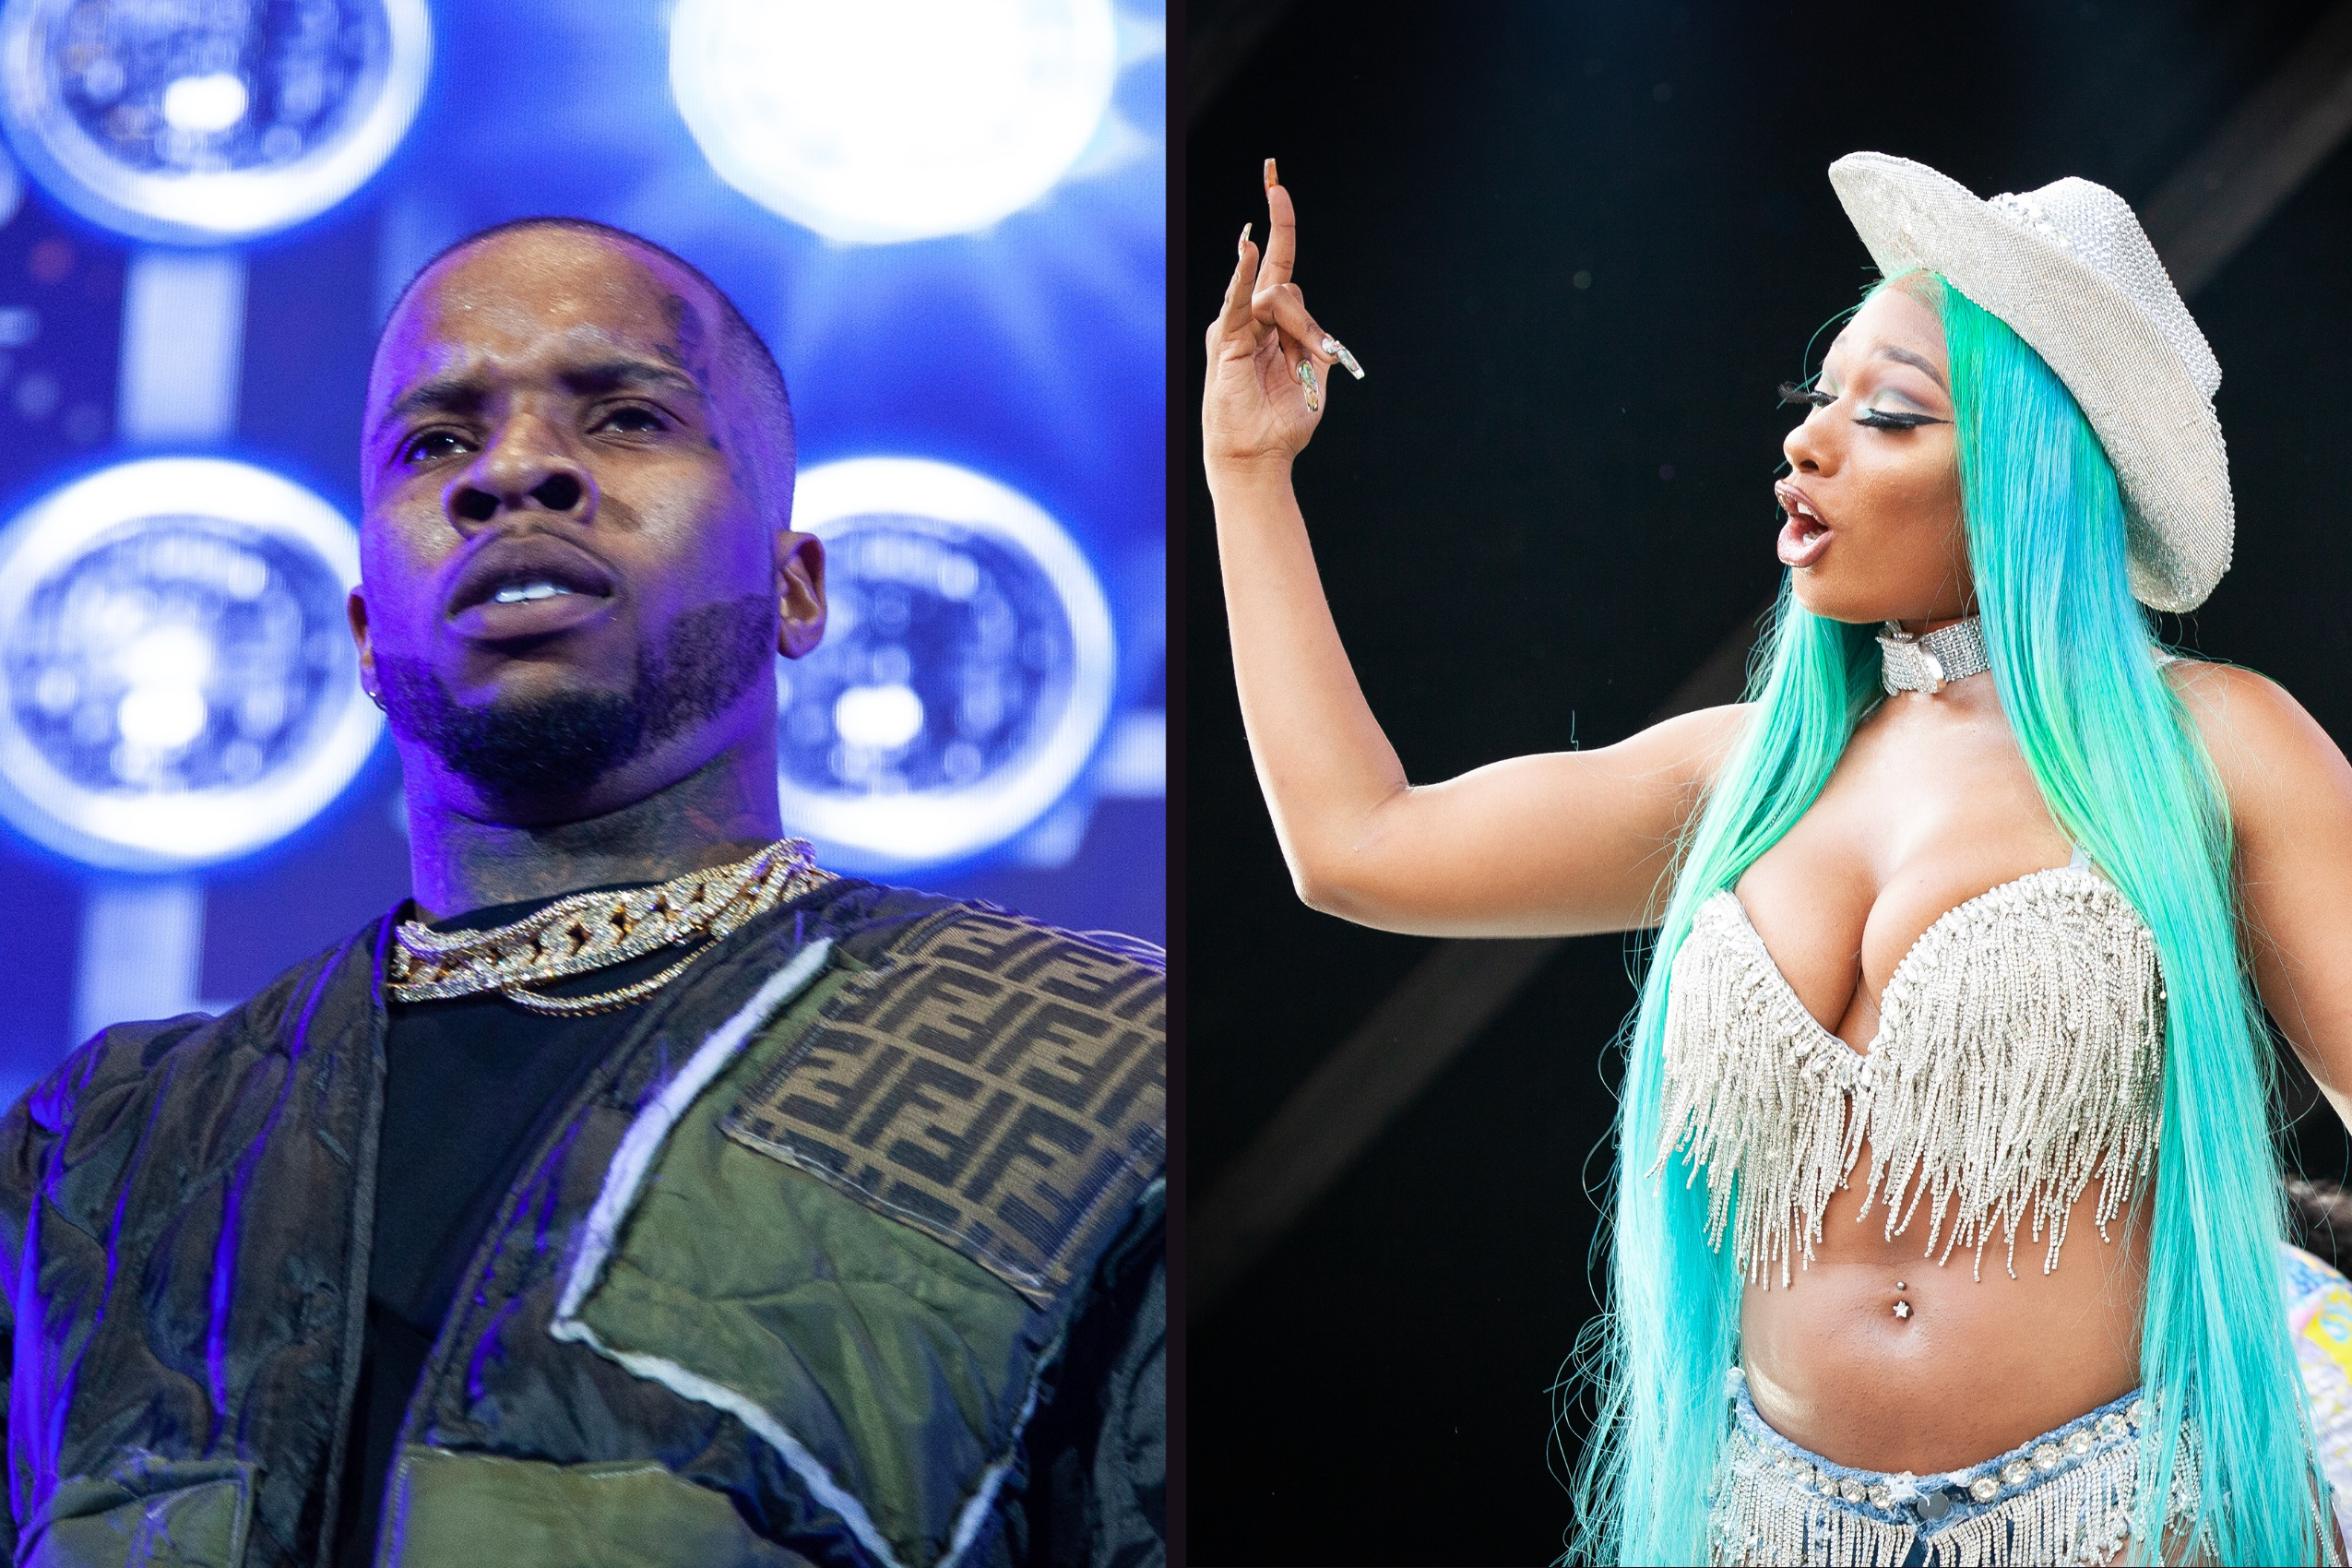 Person Responsible For Shooting Megan Thee Stallion Could Be Charged Soon